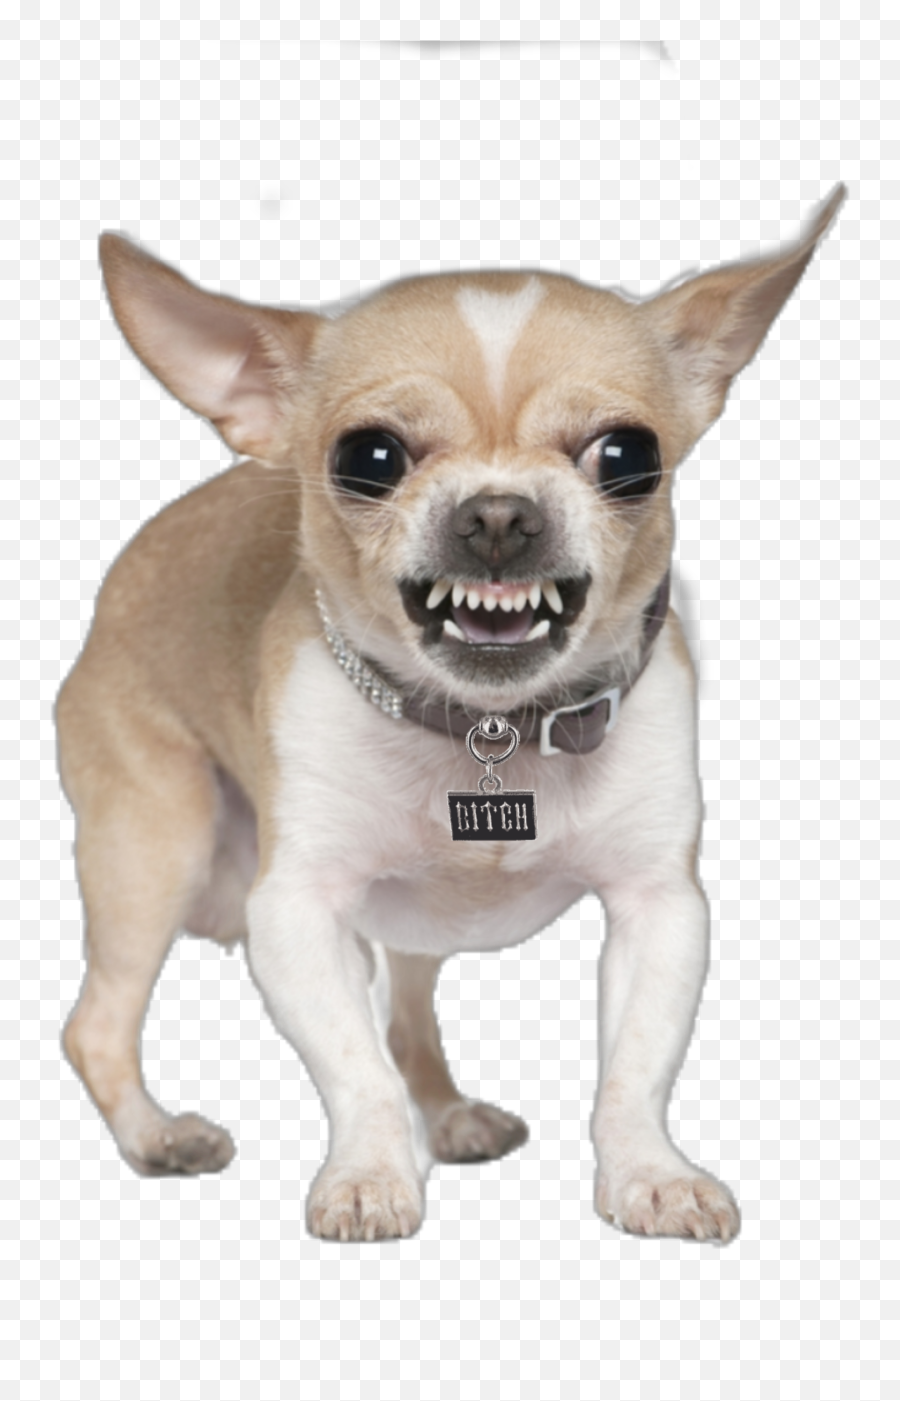 The Most Edited - Small Angry Dog Emoji,Chihuahua Emoticon